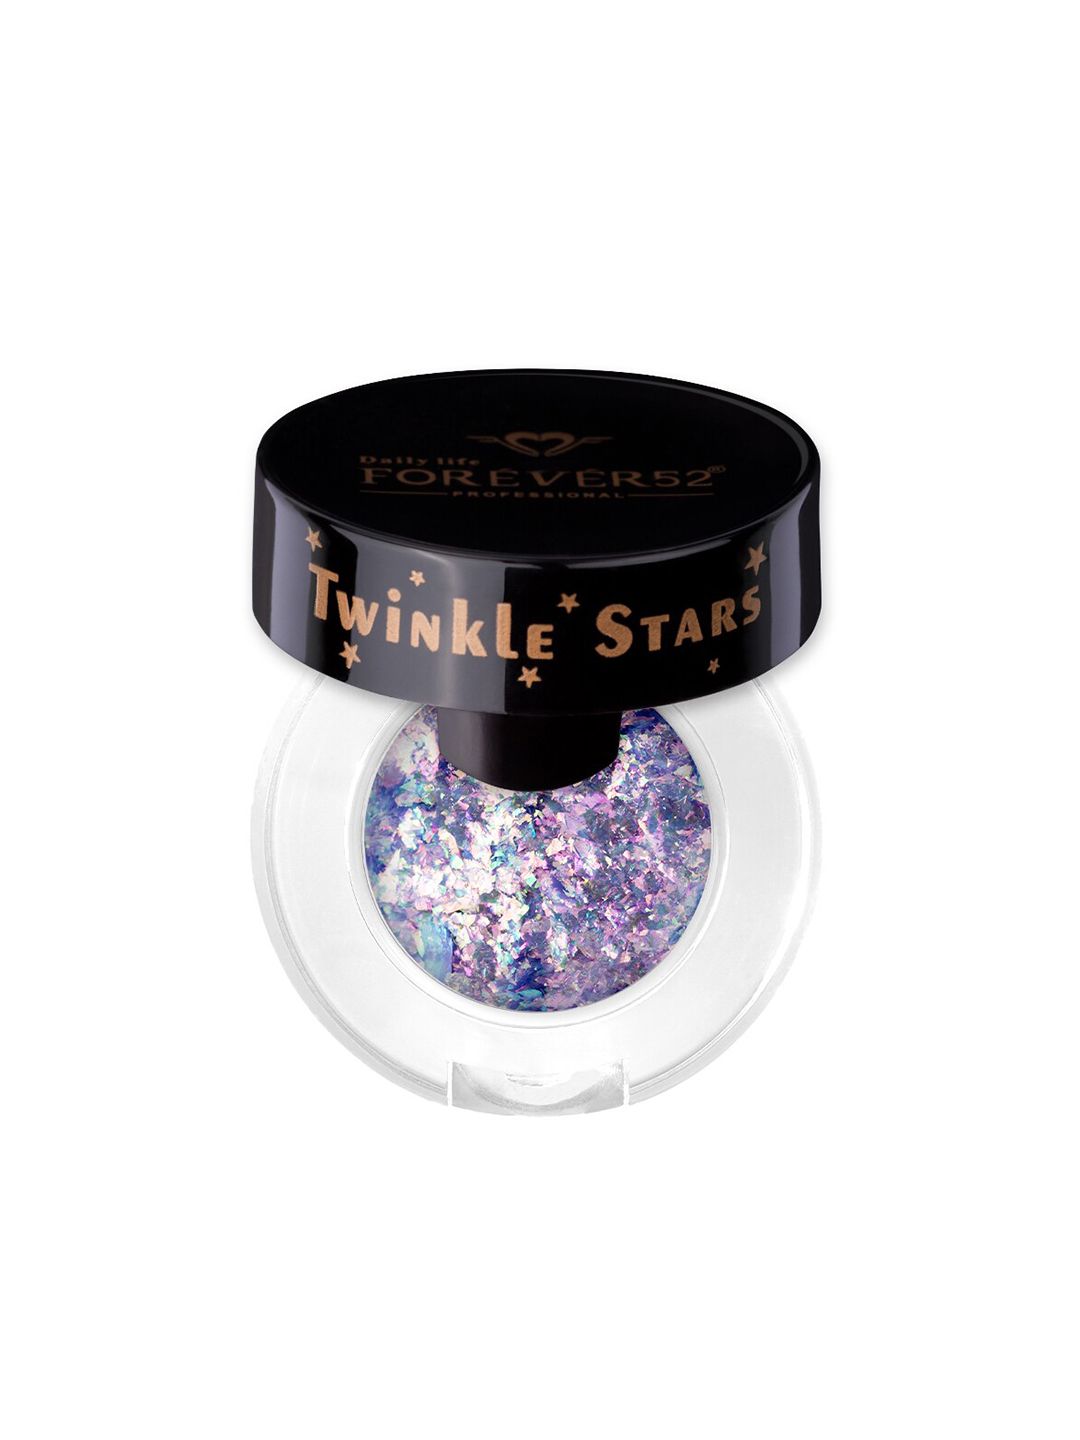 Daily Life Forever52 Twinkle Star Flakes Eyeshadow - TF016 Price in India